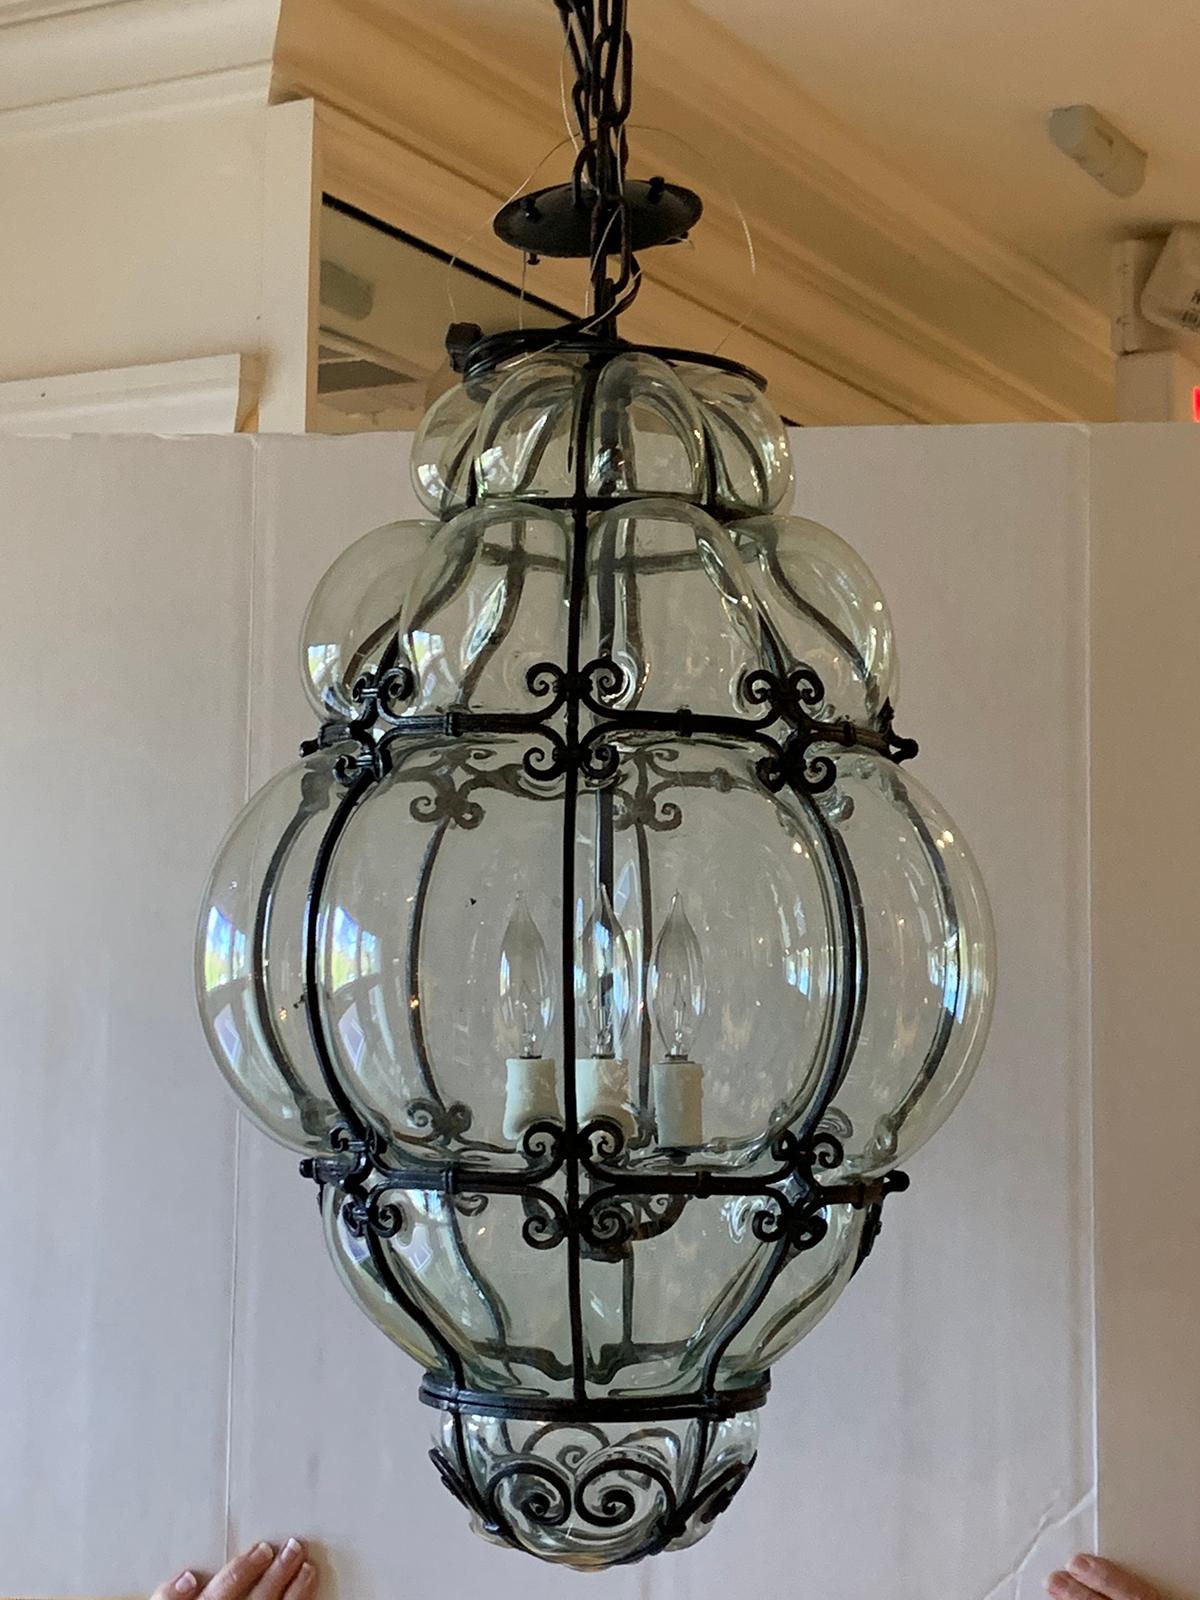 Pair of 20th century large Italian Murano bubble glass iron-bound lanterns
Three light cluster
Glass tinted a faint blue/green not turquoise. The turquoise you see is a reflection of our front door.
Brand new wiring.